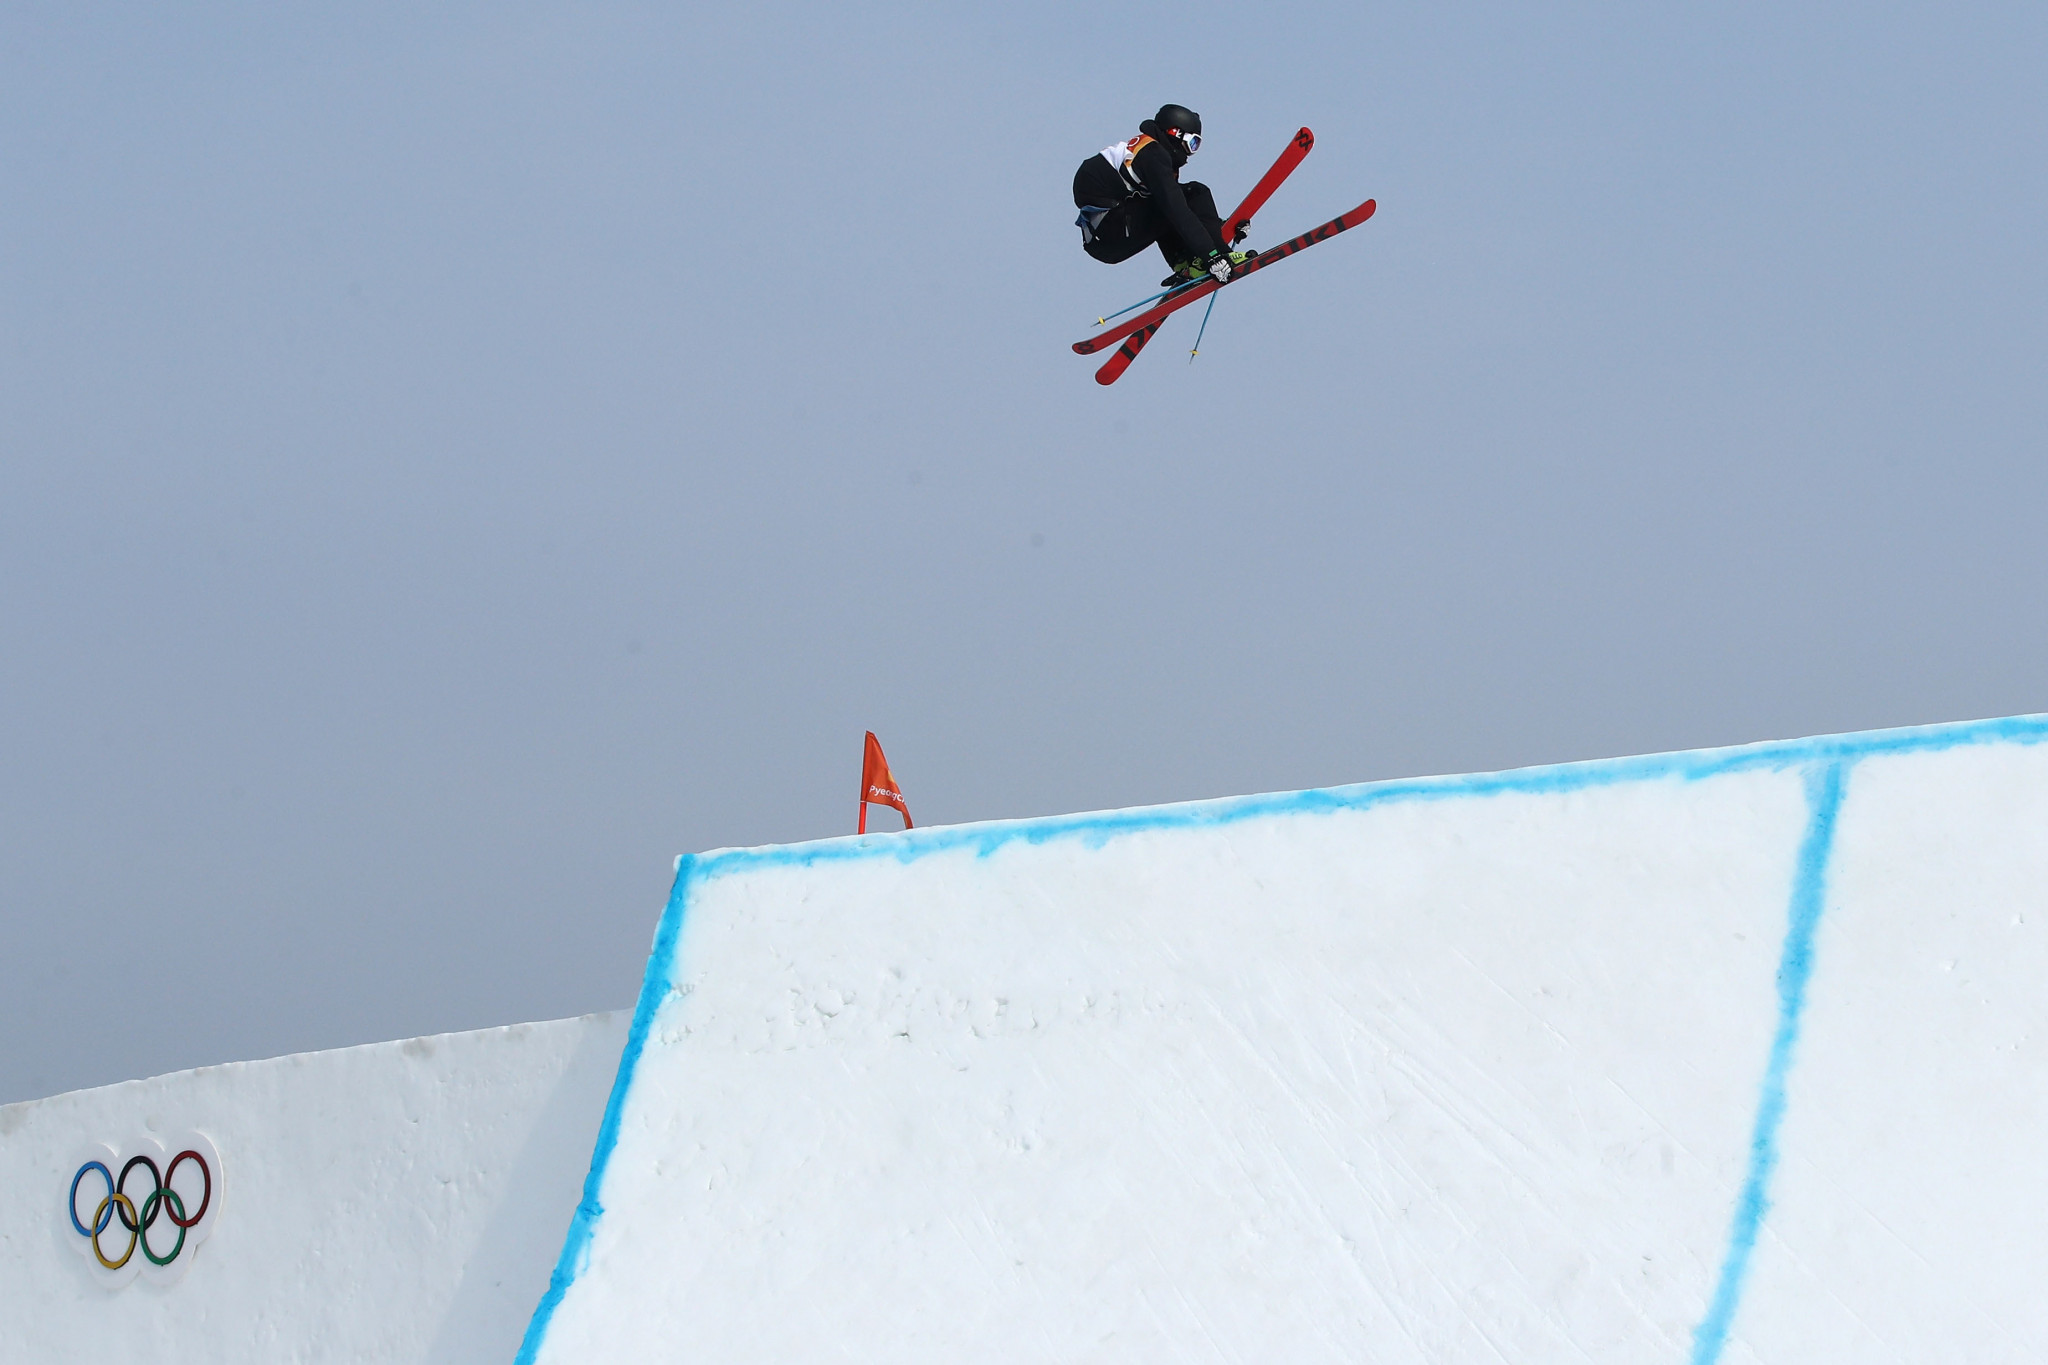 World Cup titles on the line at final slopestyle leg in Seiseralm